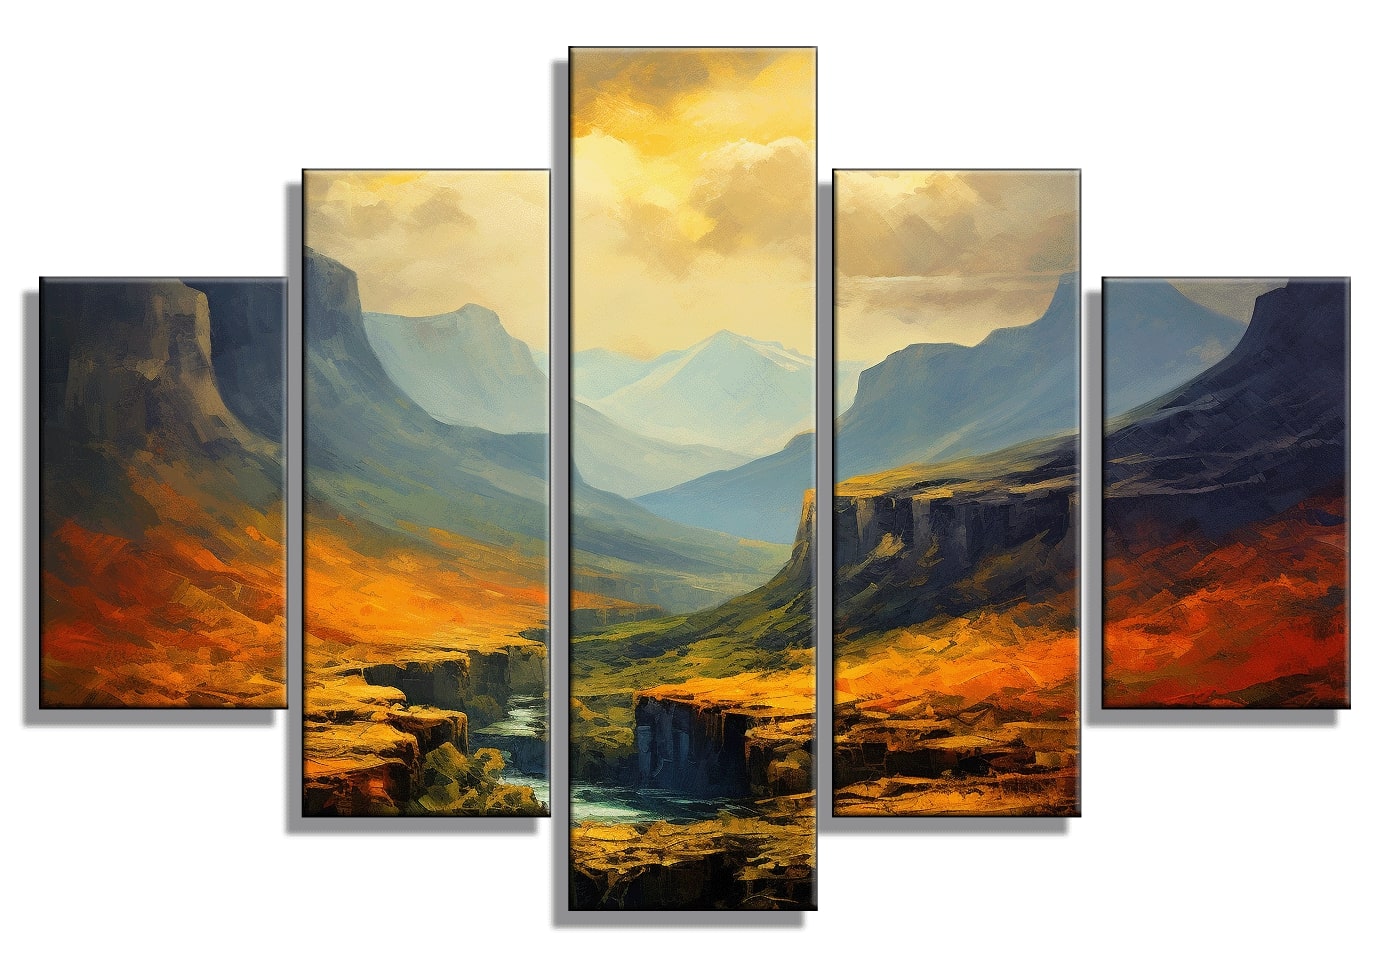 Multi-Panel Mount Elgon Majesty Painting - 40x60 inches